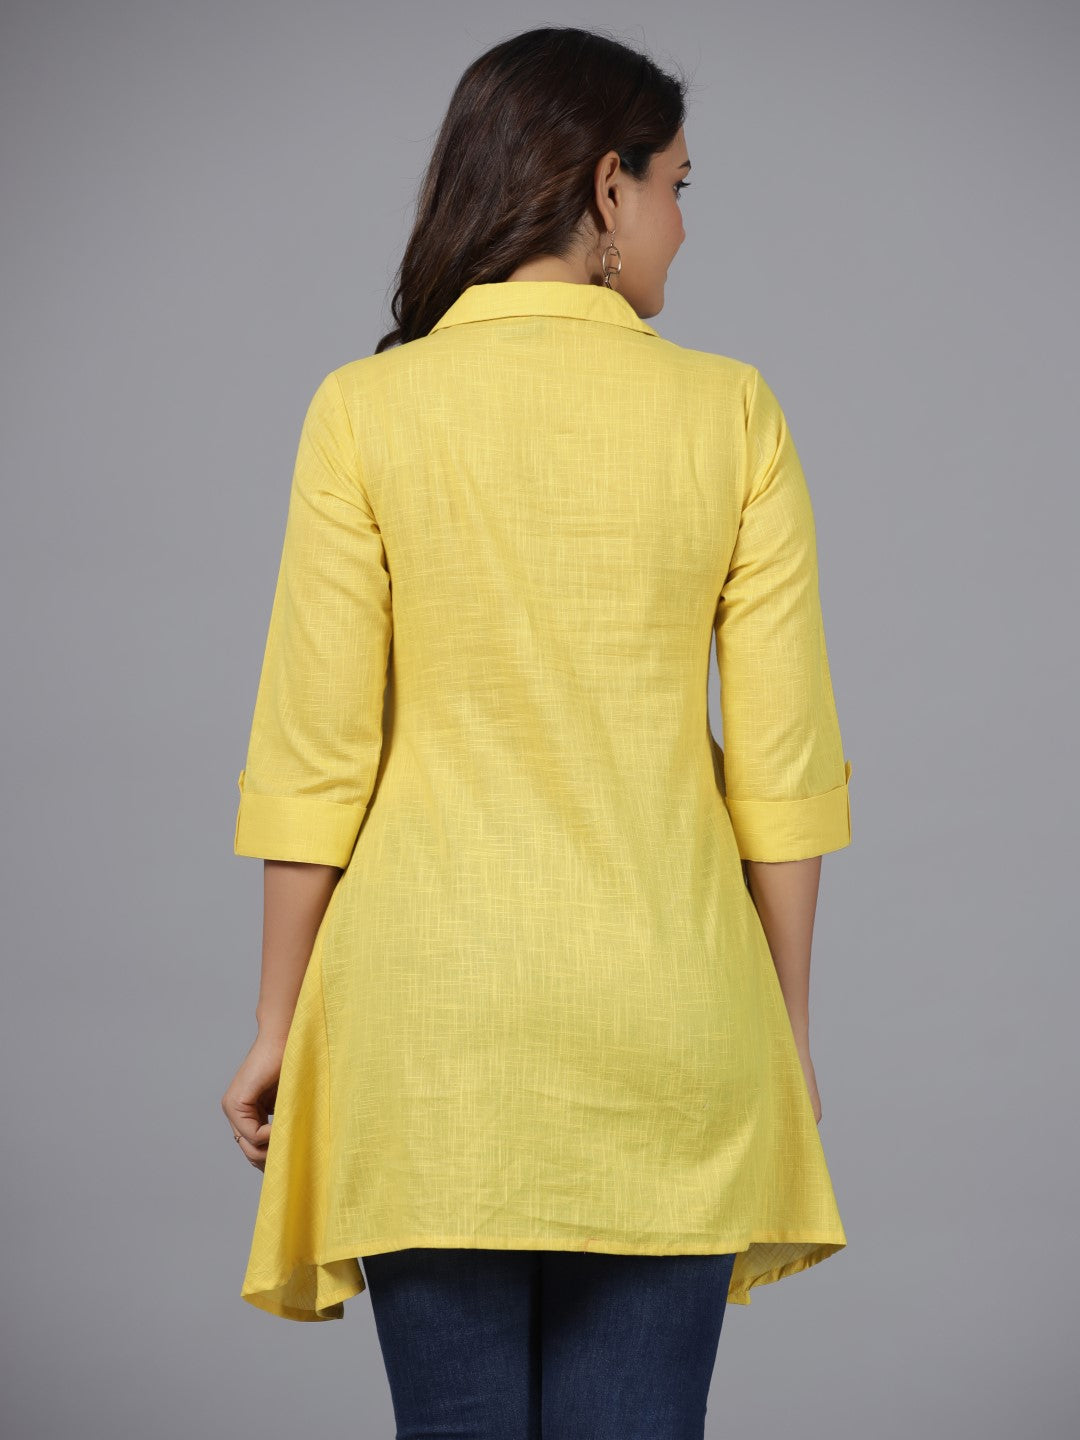 Juniper Women Cotton Slub Yellow Solid with Embroidered High-Low Tunic